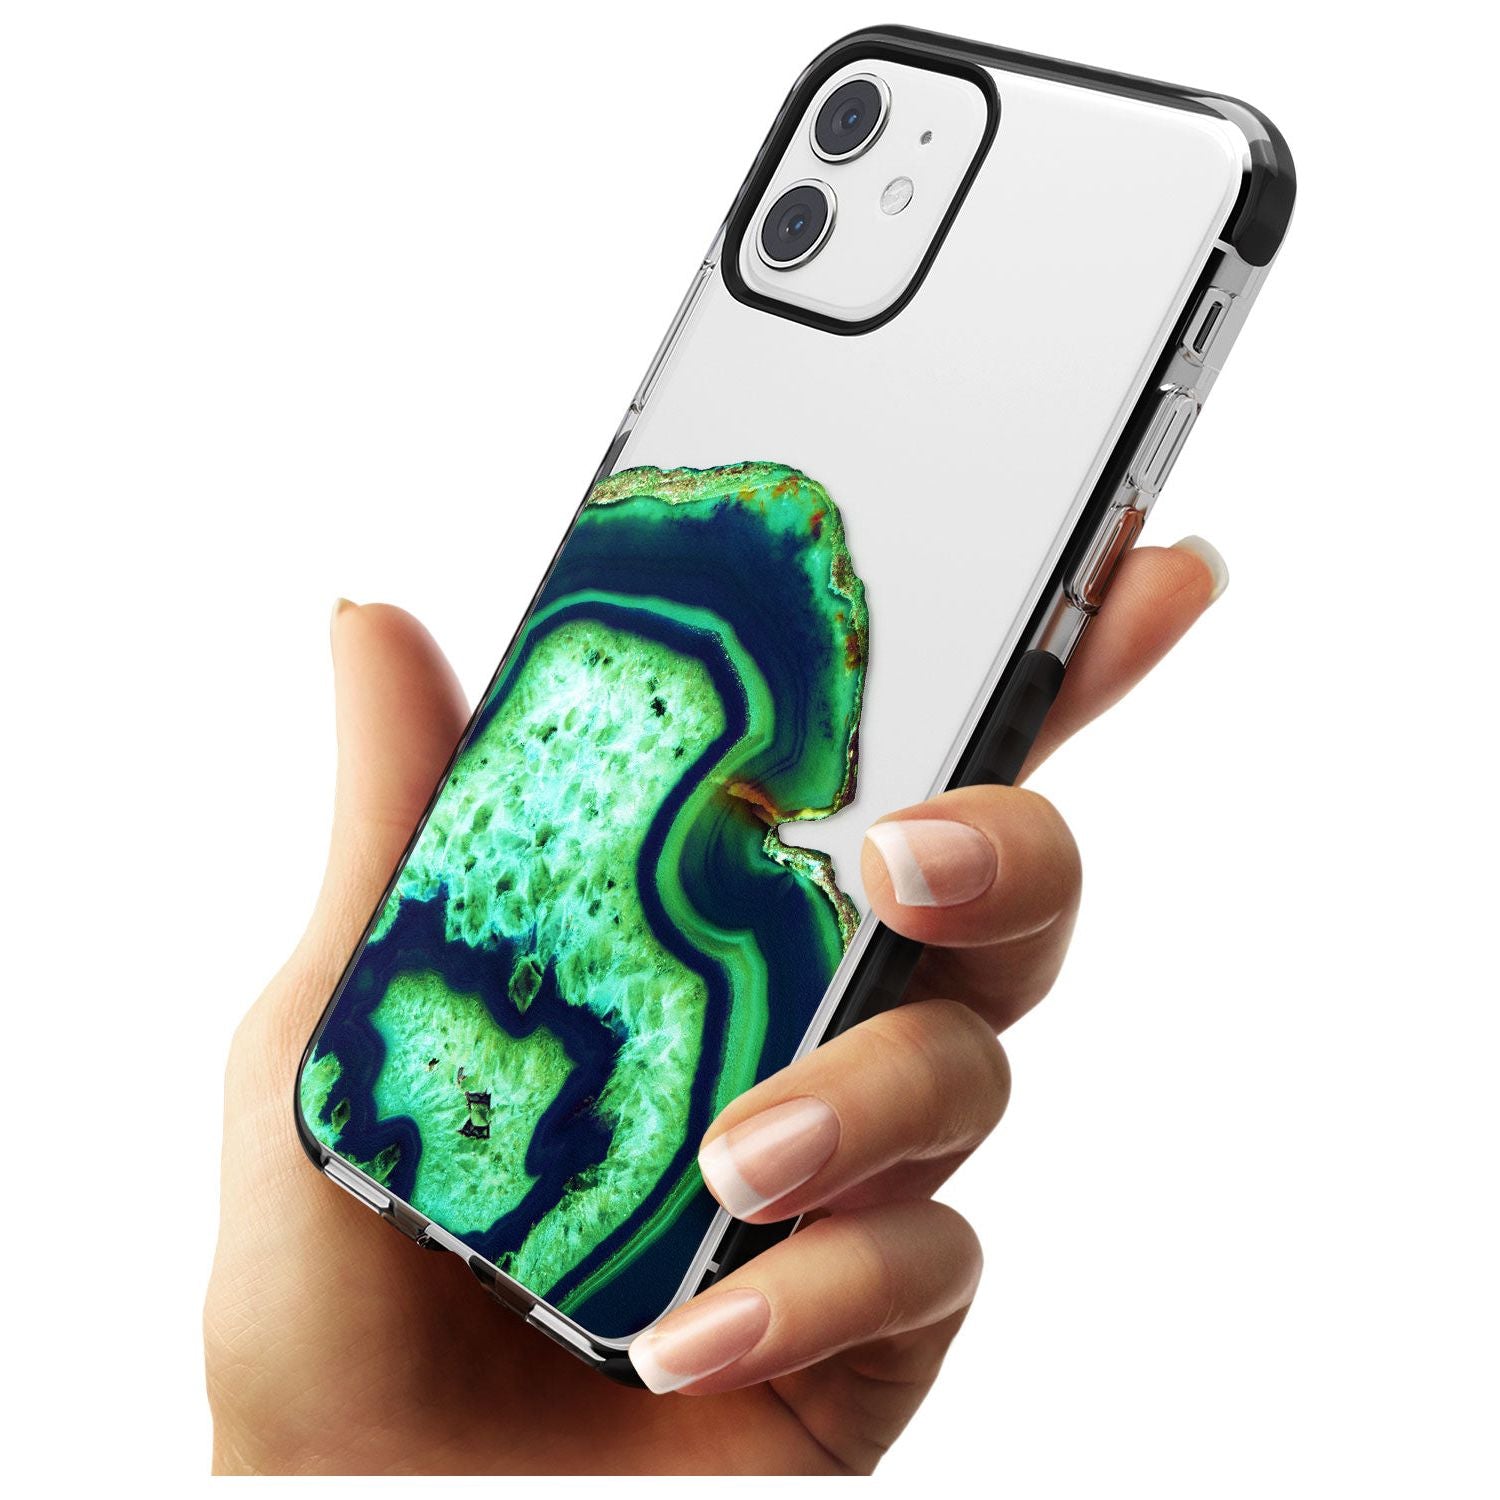 Neon Green & Blue Agate Crystal Transparent Design Black Impact Phone Case for iPhone 11